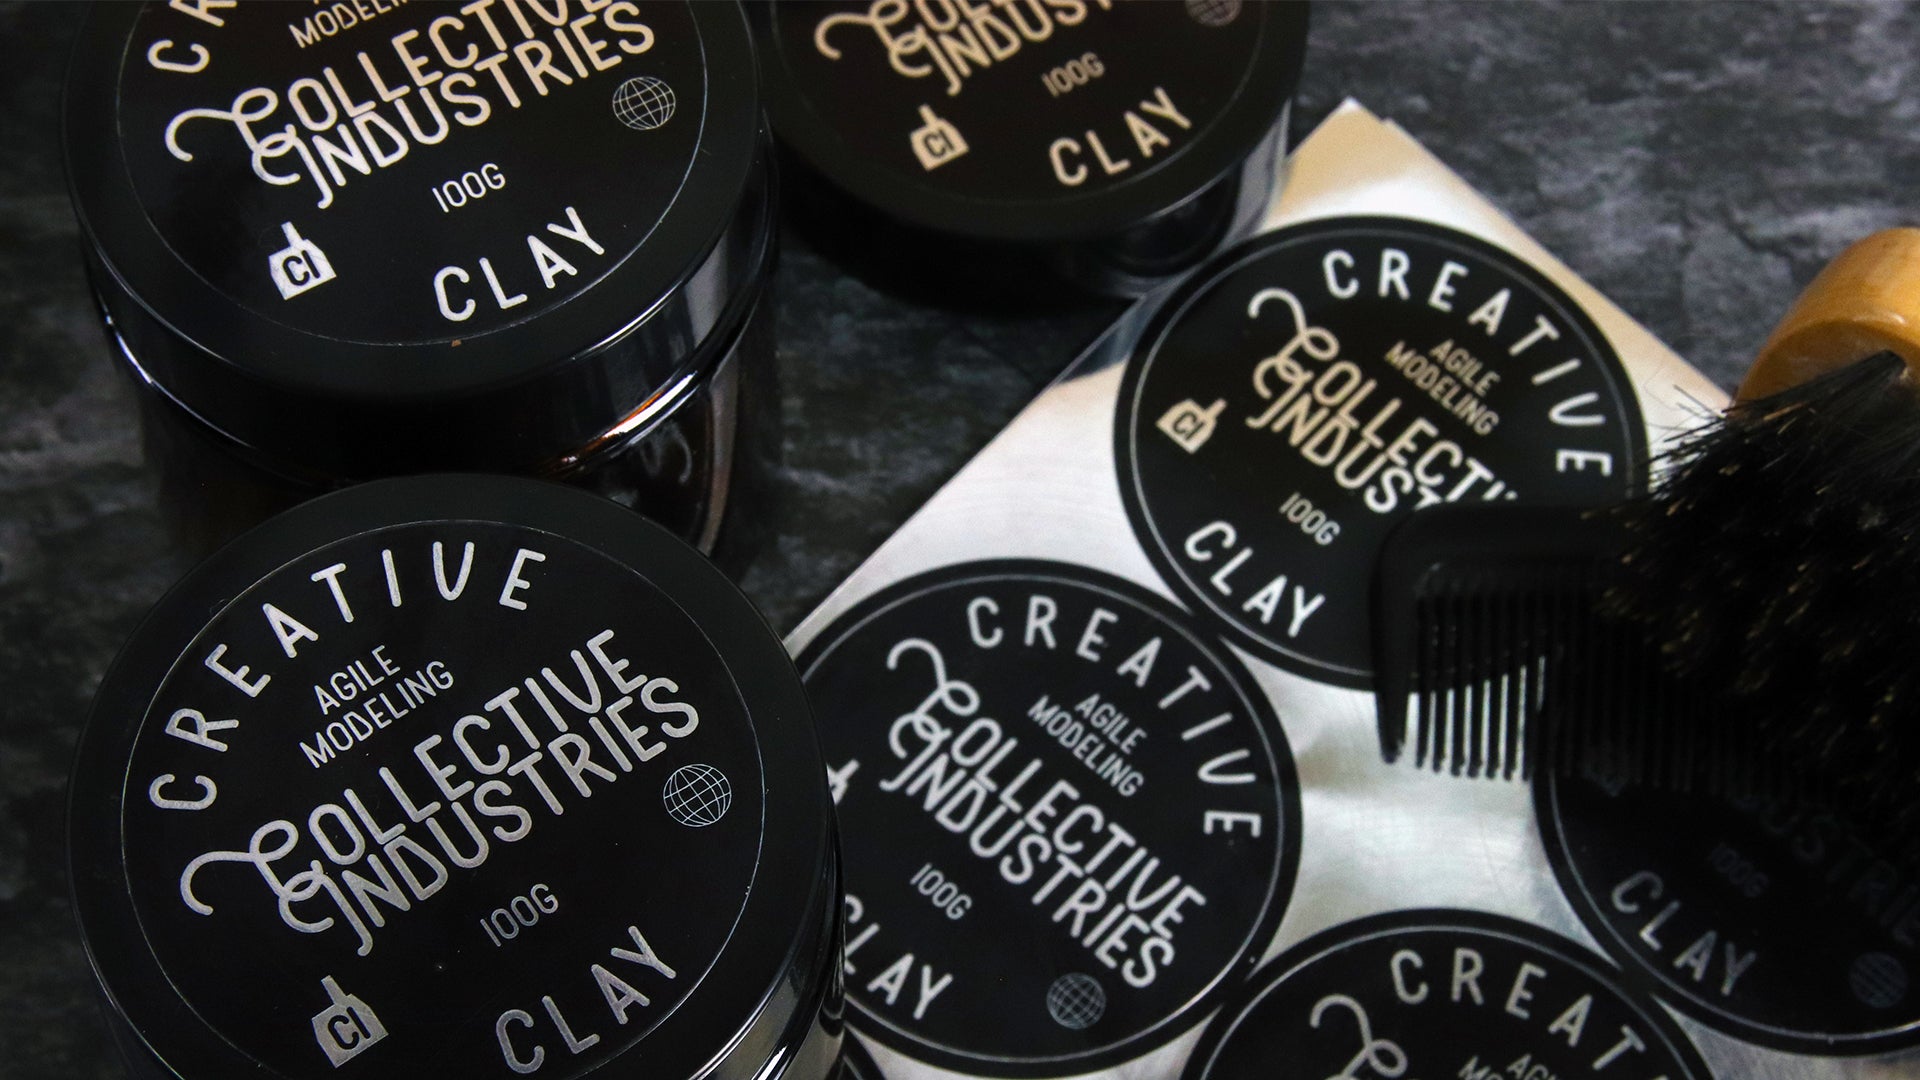 Circle mirror silver laminated labels applied to black tins containing hair care next to a sheet